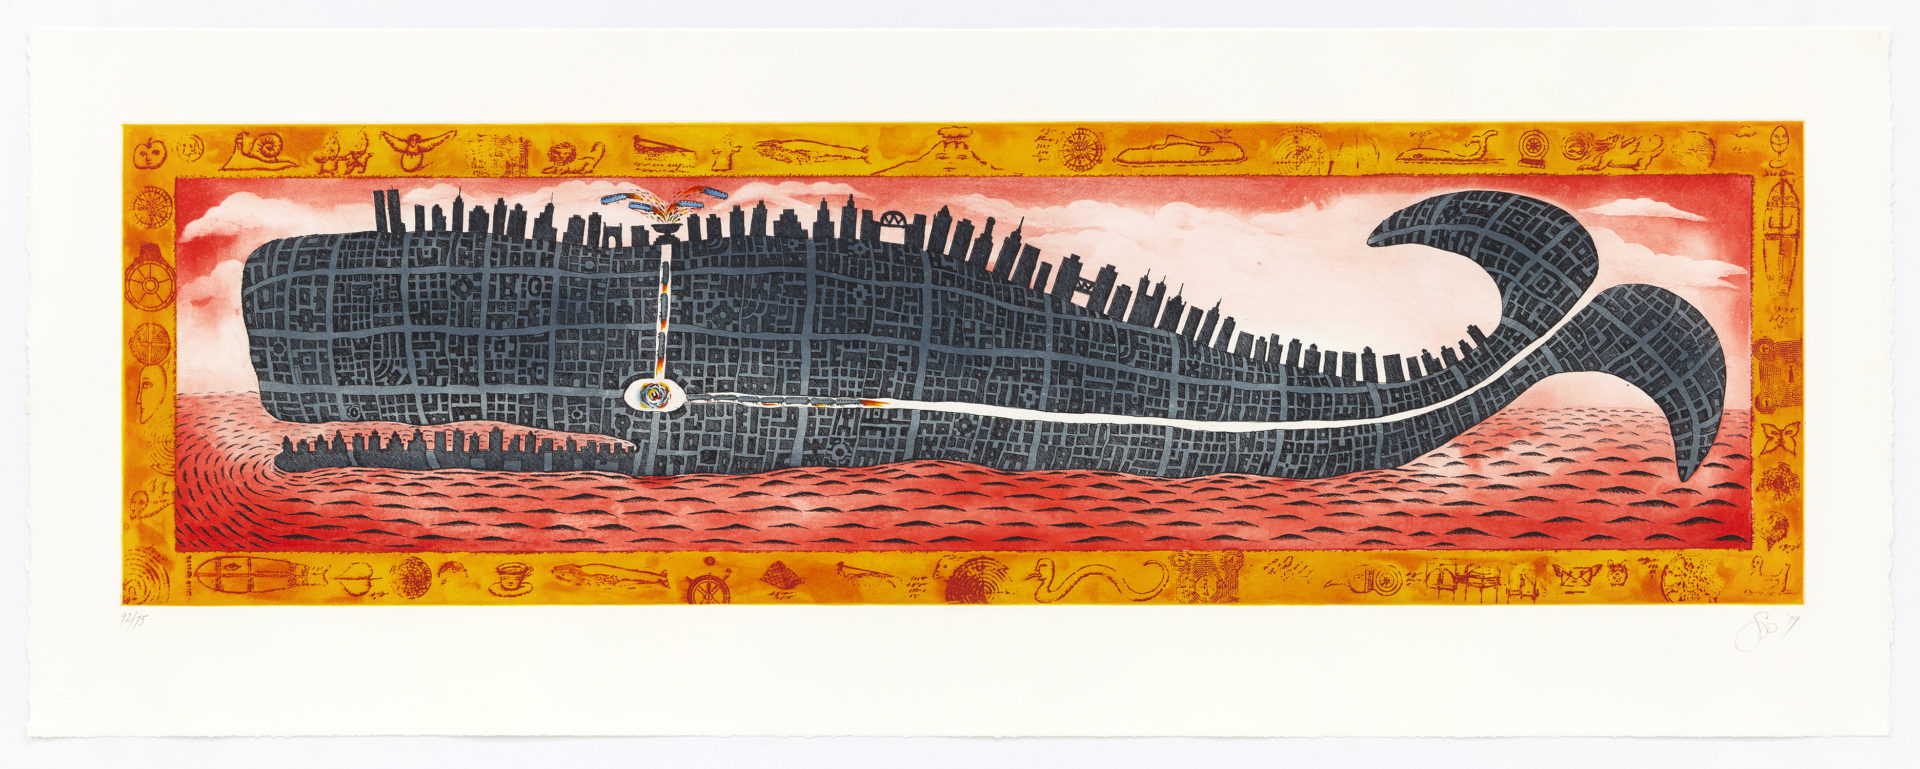 Untitled (whale), 2003, Etching and aquatint, 16 x 42 5/8 inches (40.6 x 108.3 cm), Edition of 75